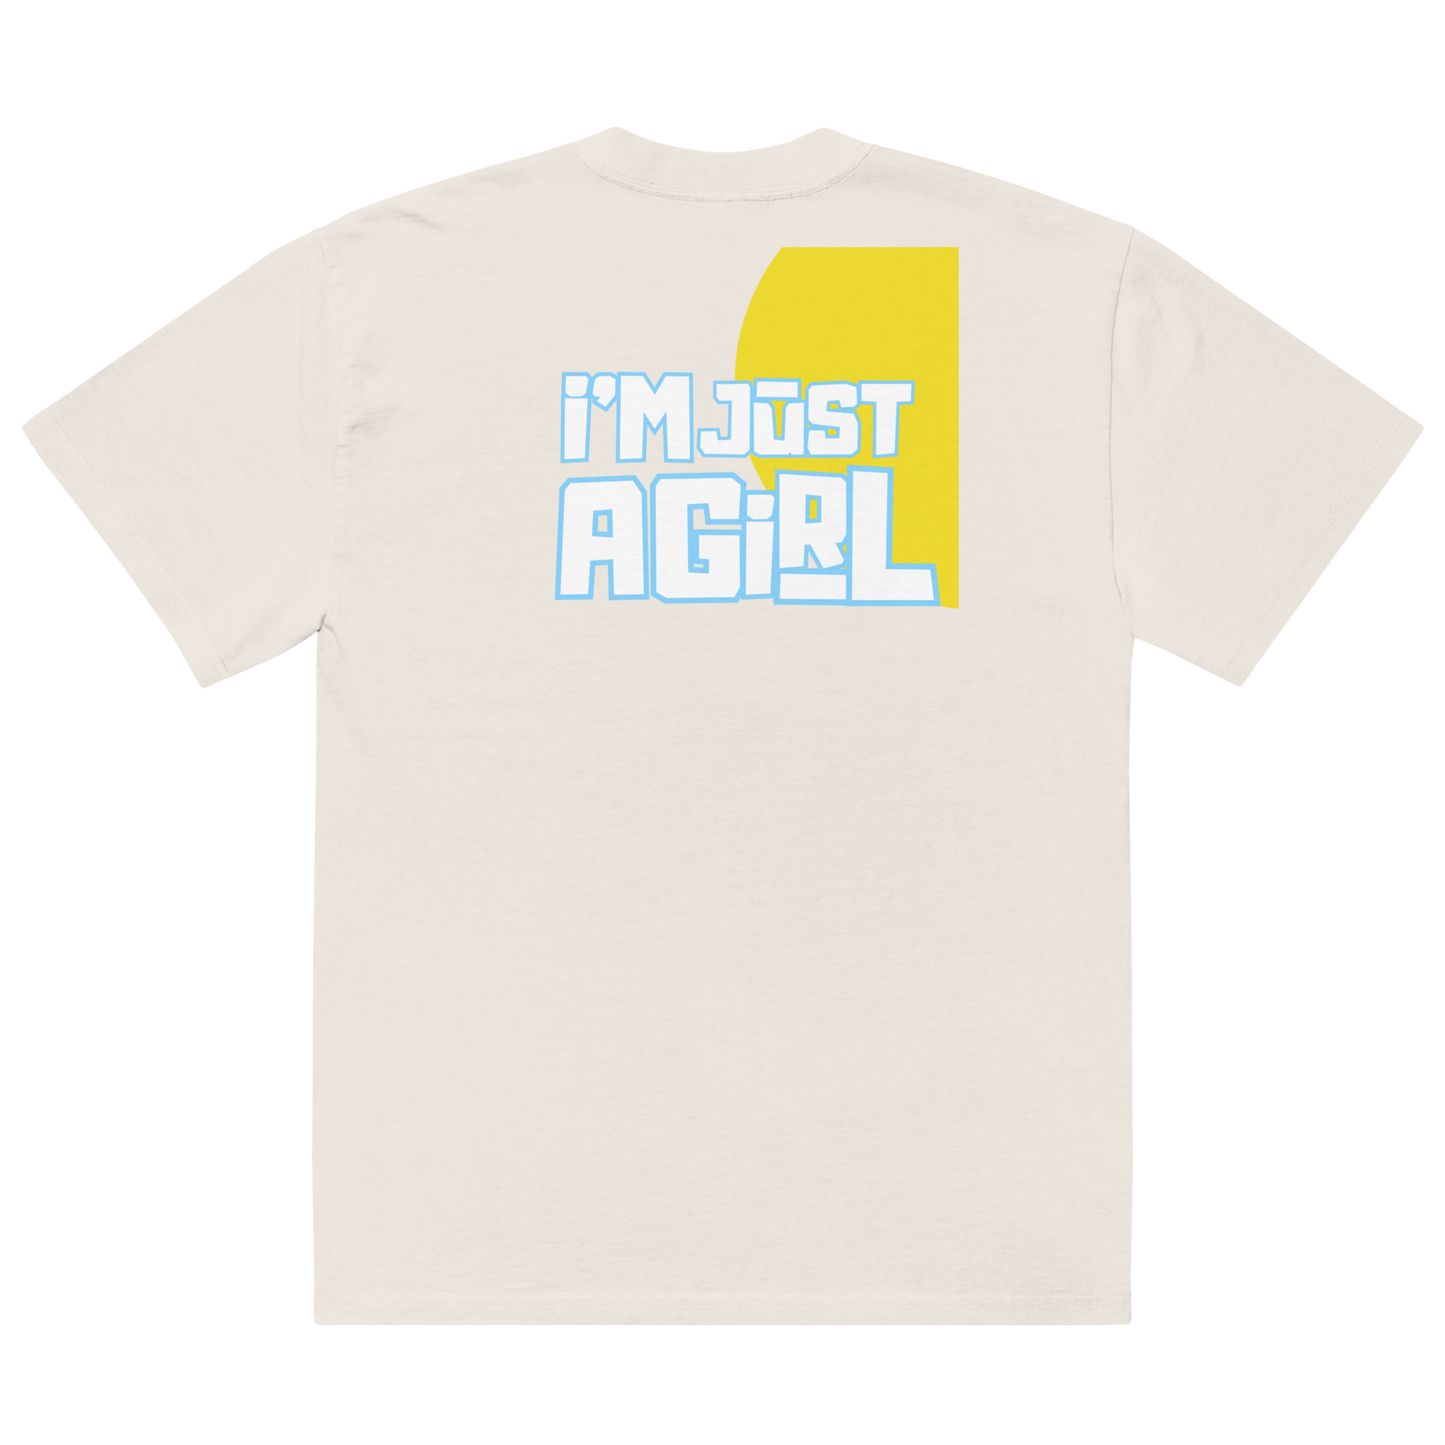 A- GAJI-I'm Just A Girl (sky blue and dandelion yellow colorway)